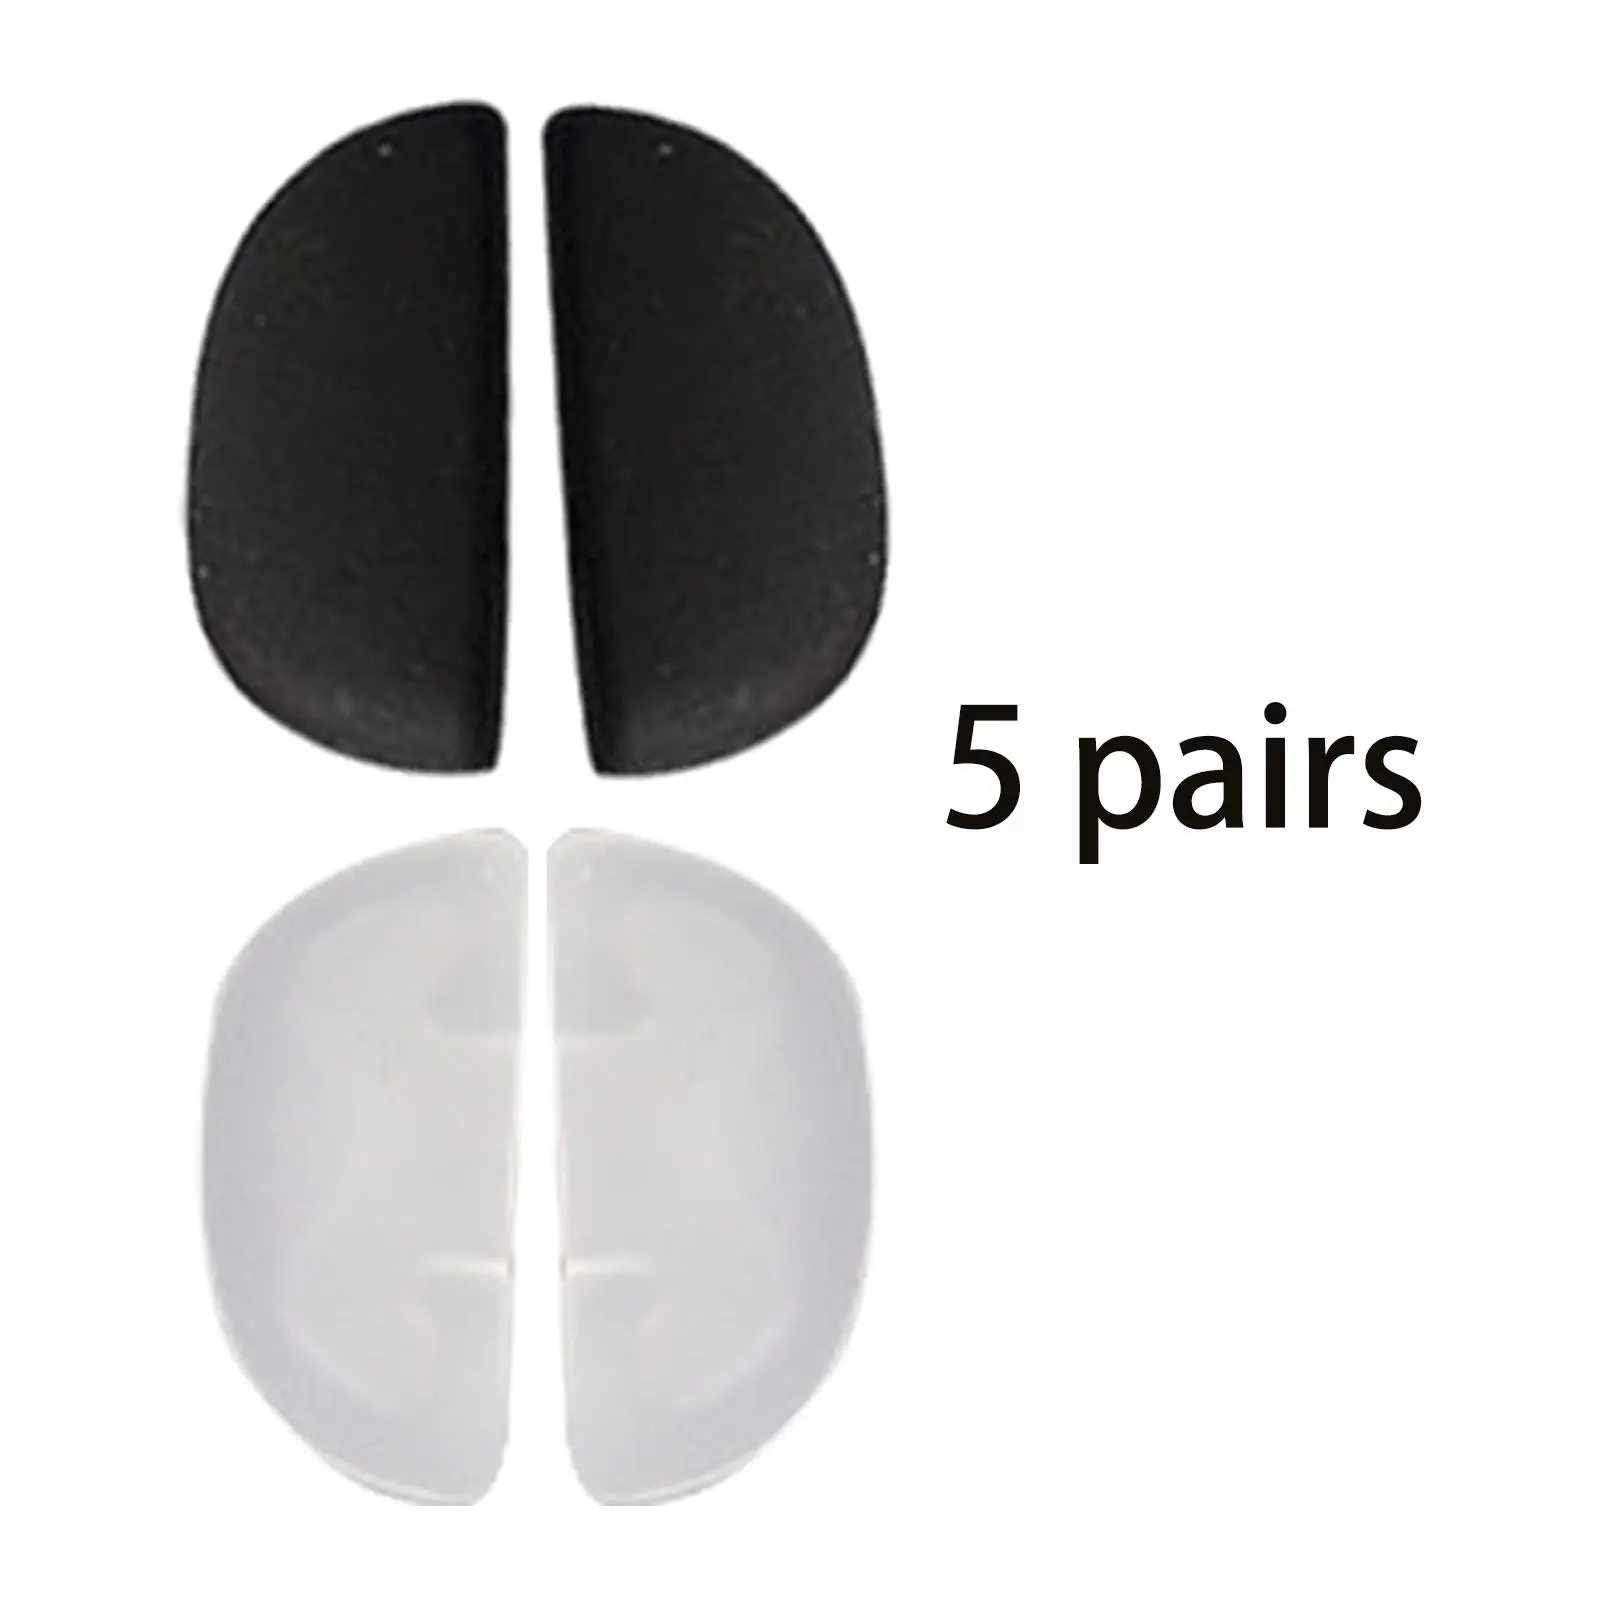 10Pcs Kids Eyeglass Nose Pads Replacement Contoured Comfortable for Glasses